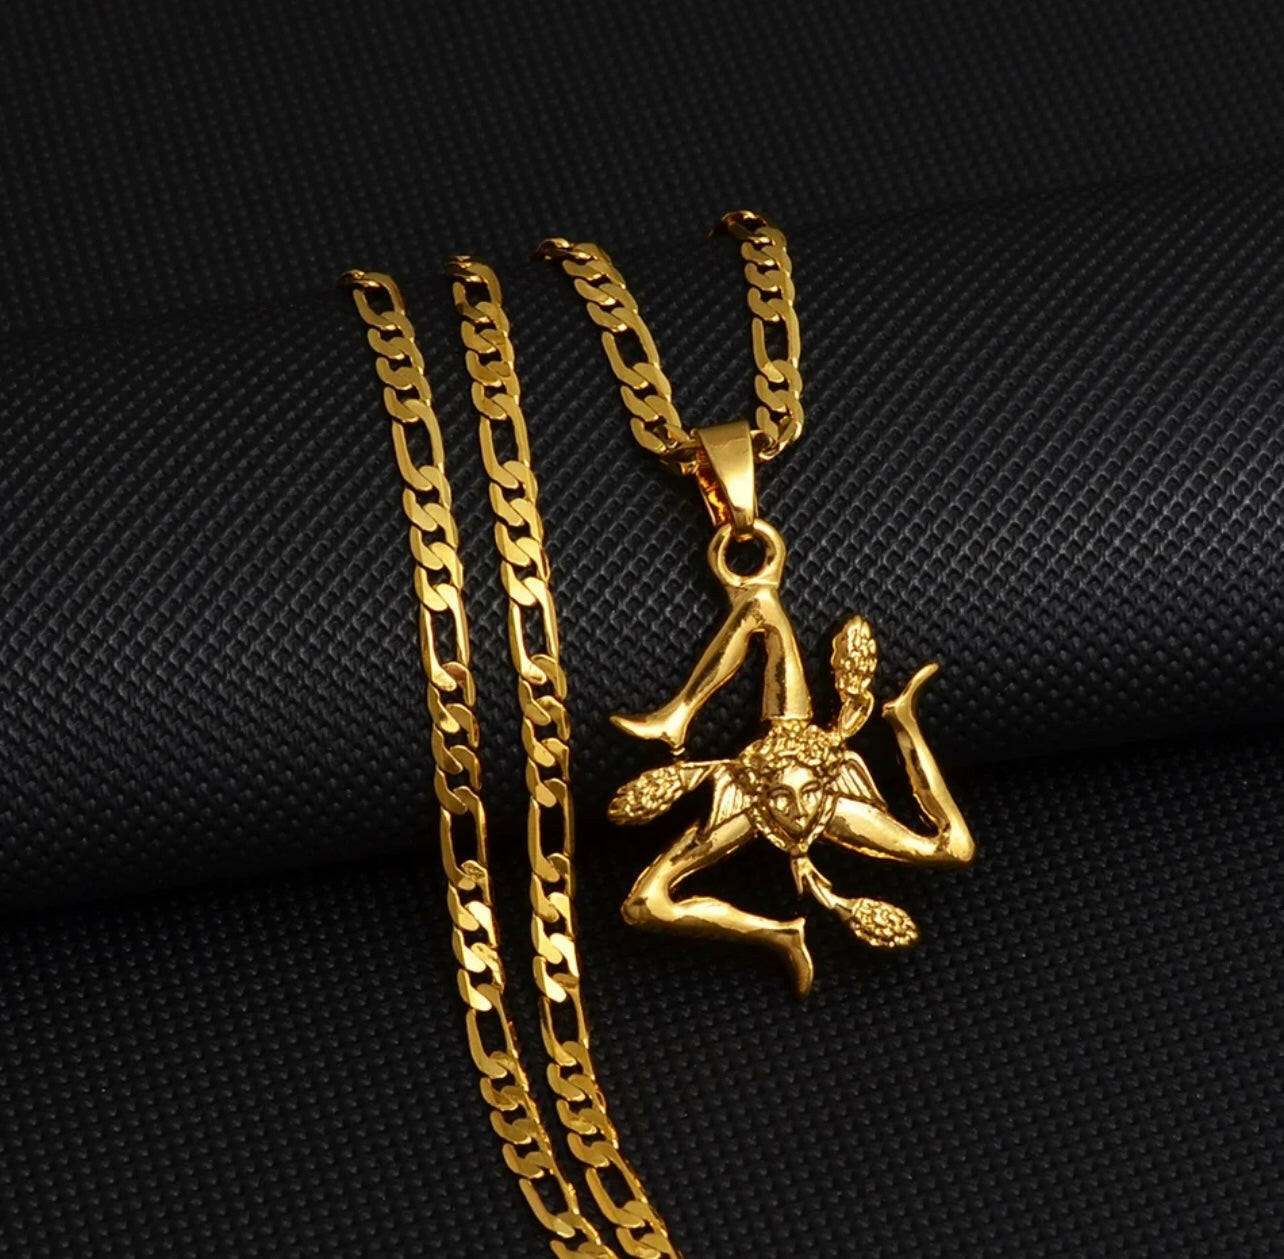 Gold Plated Sicilian Sicily Necklace.